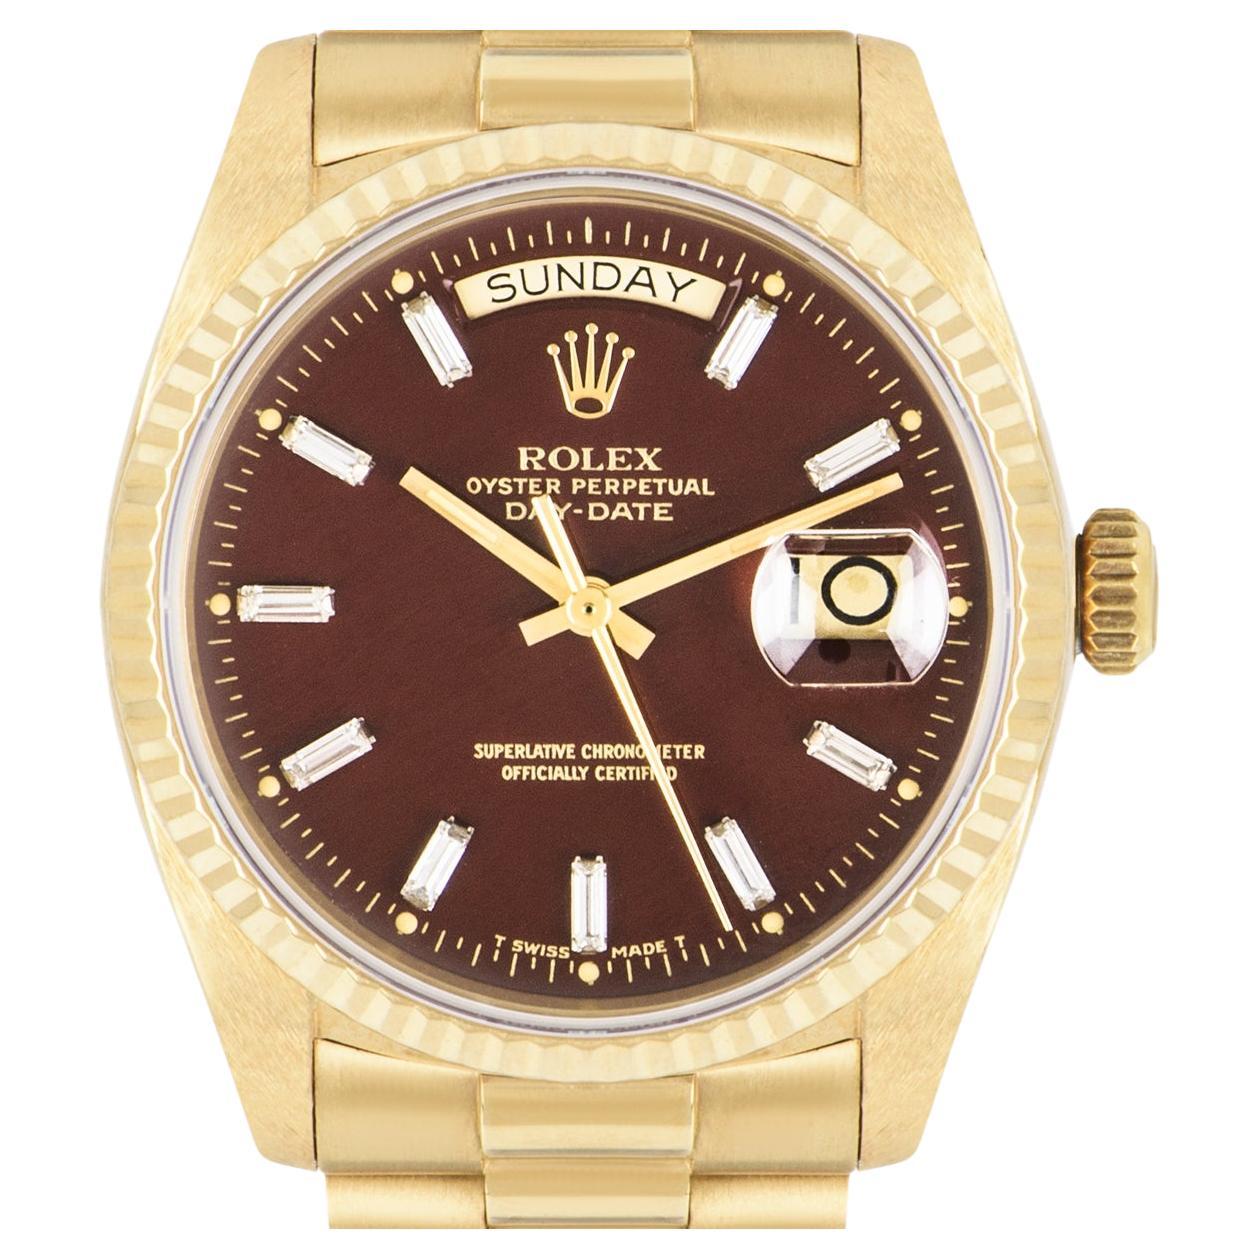 A rare yellow gold Day-Date by Rolex. Featuring the highly sought out and collectable oxblood Stella dial, which features emerald cut diamond hour markers and a fixed yellow gold fluted bezel.

Fitted with a sapphire glass and powered by a